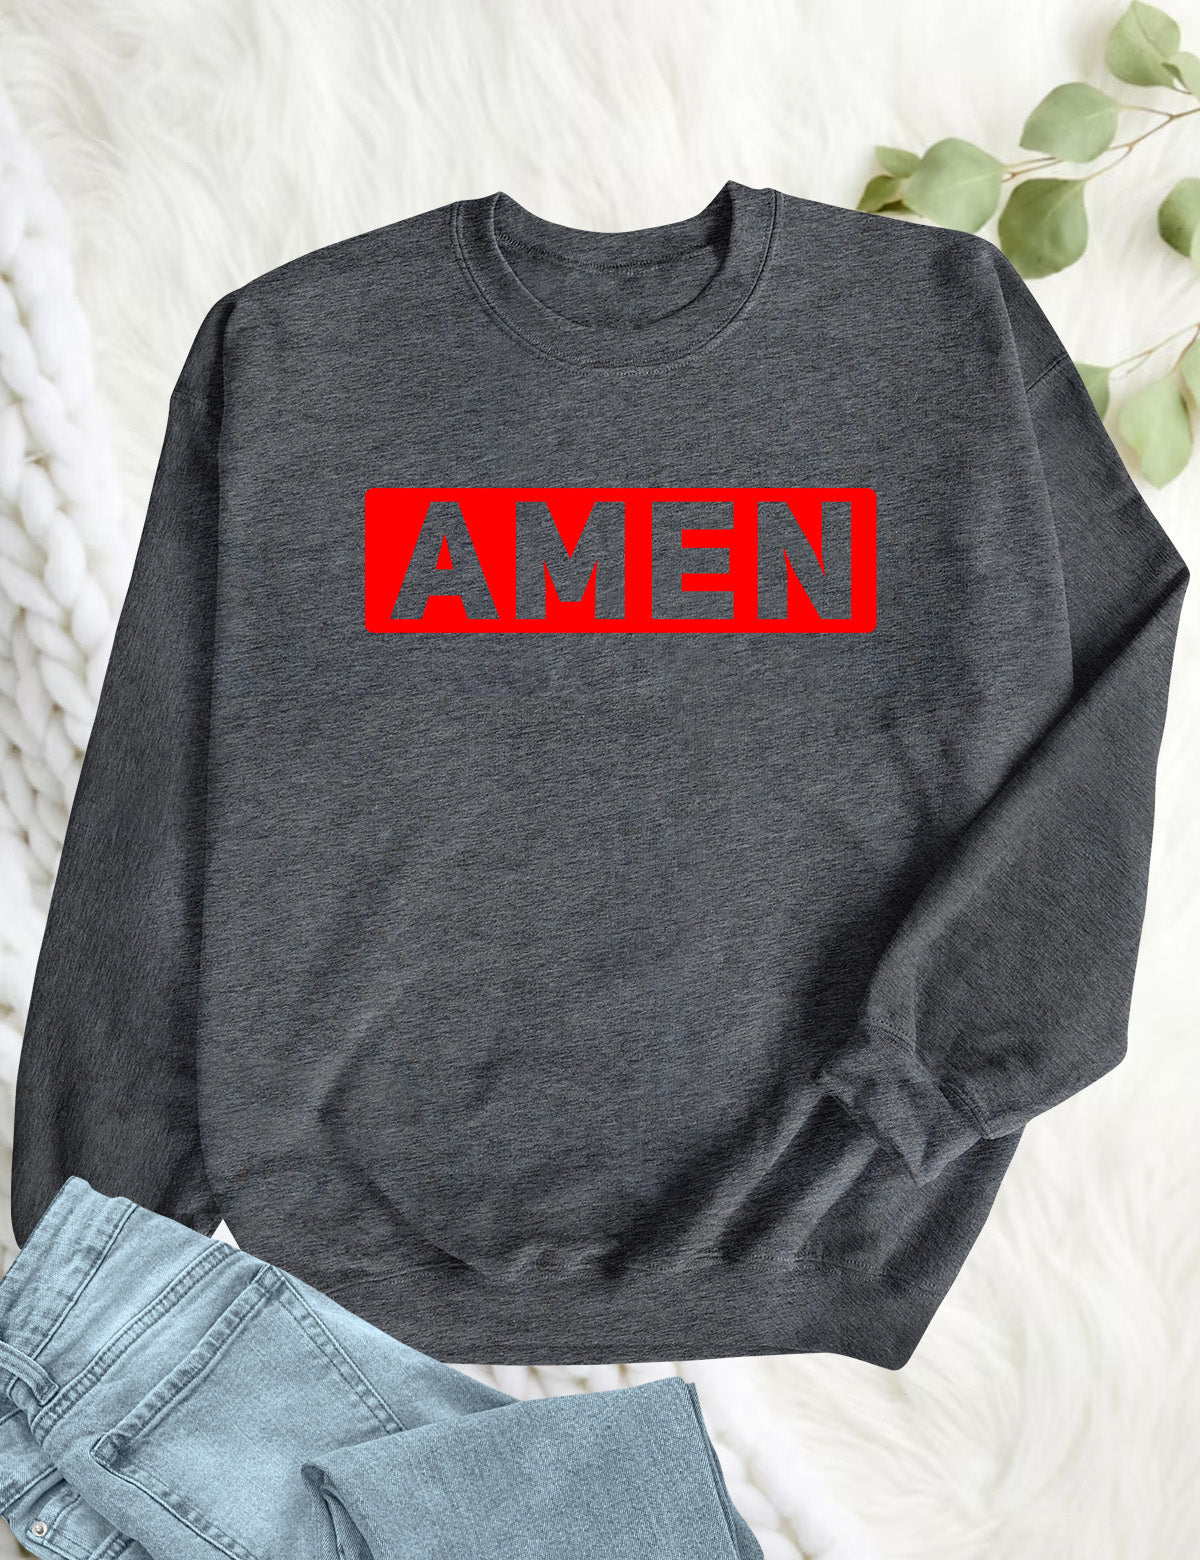 AMEN Religious Sweatshirts Let God's will Be Done